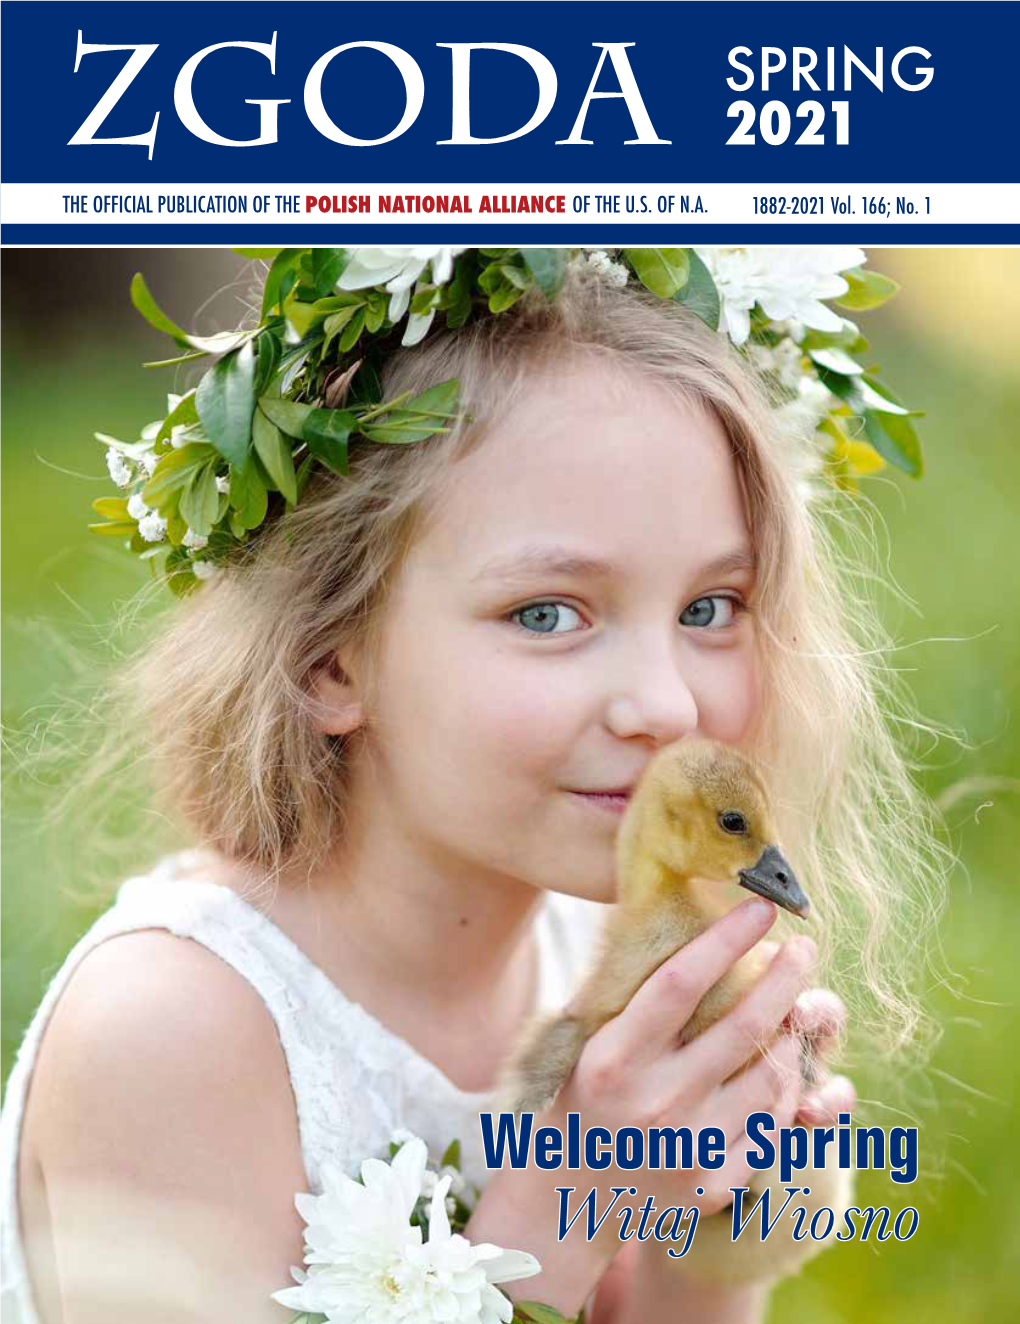 Welcome Spring Witaj Wiosno (USPS 699-120) Published Quarterly the Official Publication of the Polish National Alliance 6100 N